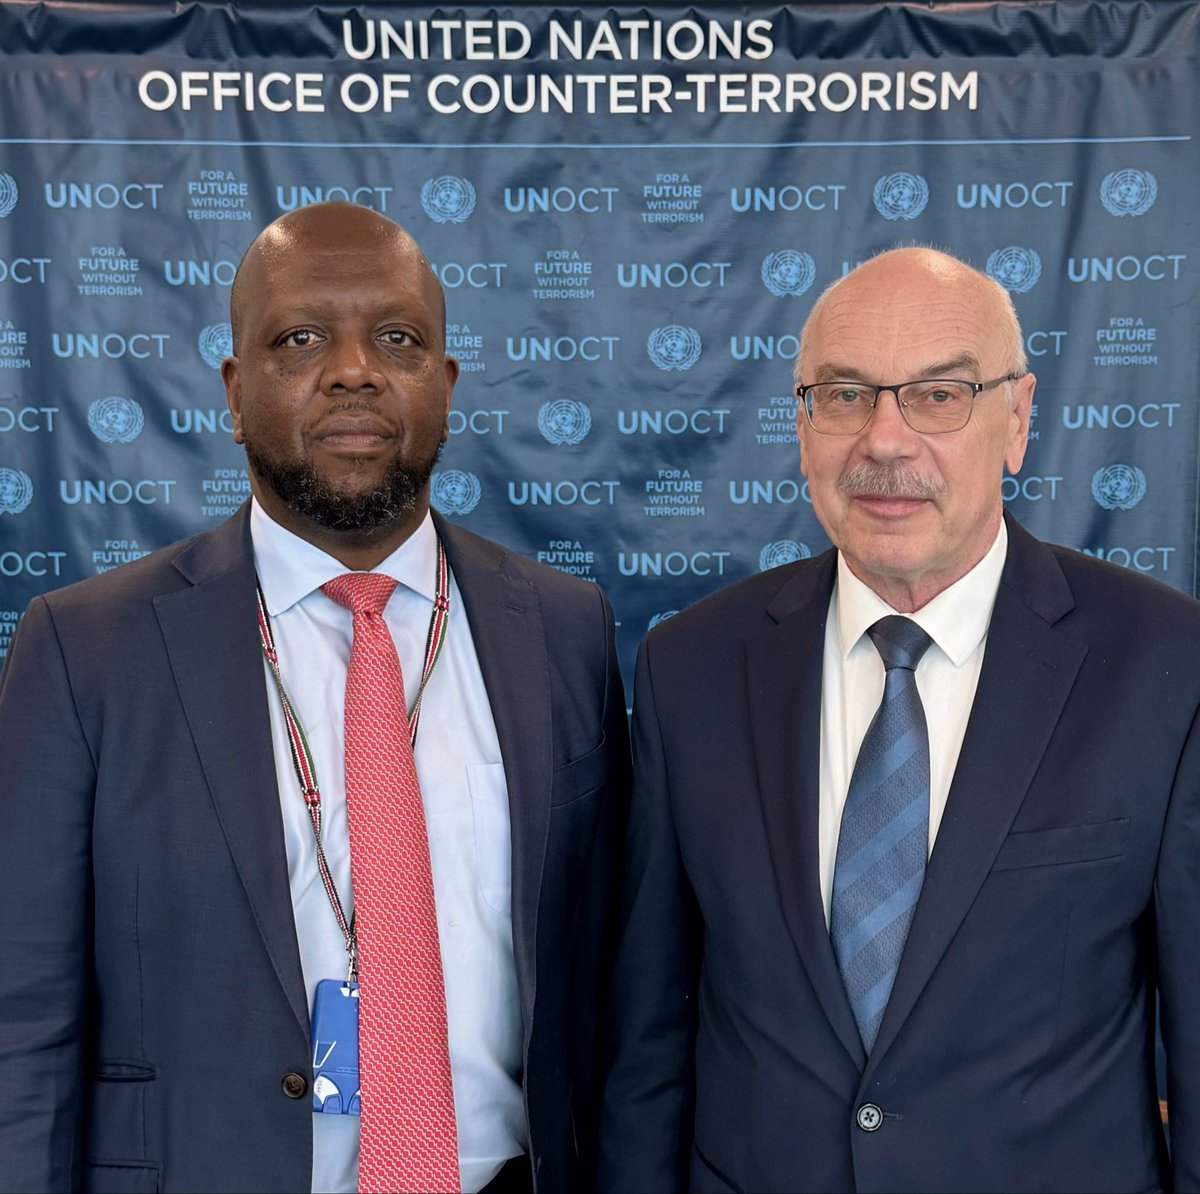 USG Voronkov bid farewell to @ambmkimani, Permanent Representative of #Kenya, and expressed appreciation for the leadership provided during his tenure and the fruitful cooperation with 🇰🇪 on #CounterTerrorism issues, including through the @un_octProgramme Office in Nairobi🤝